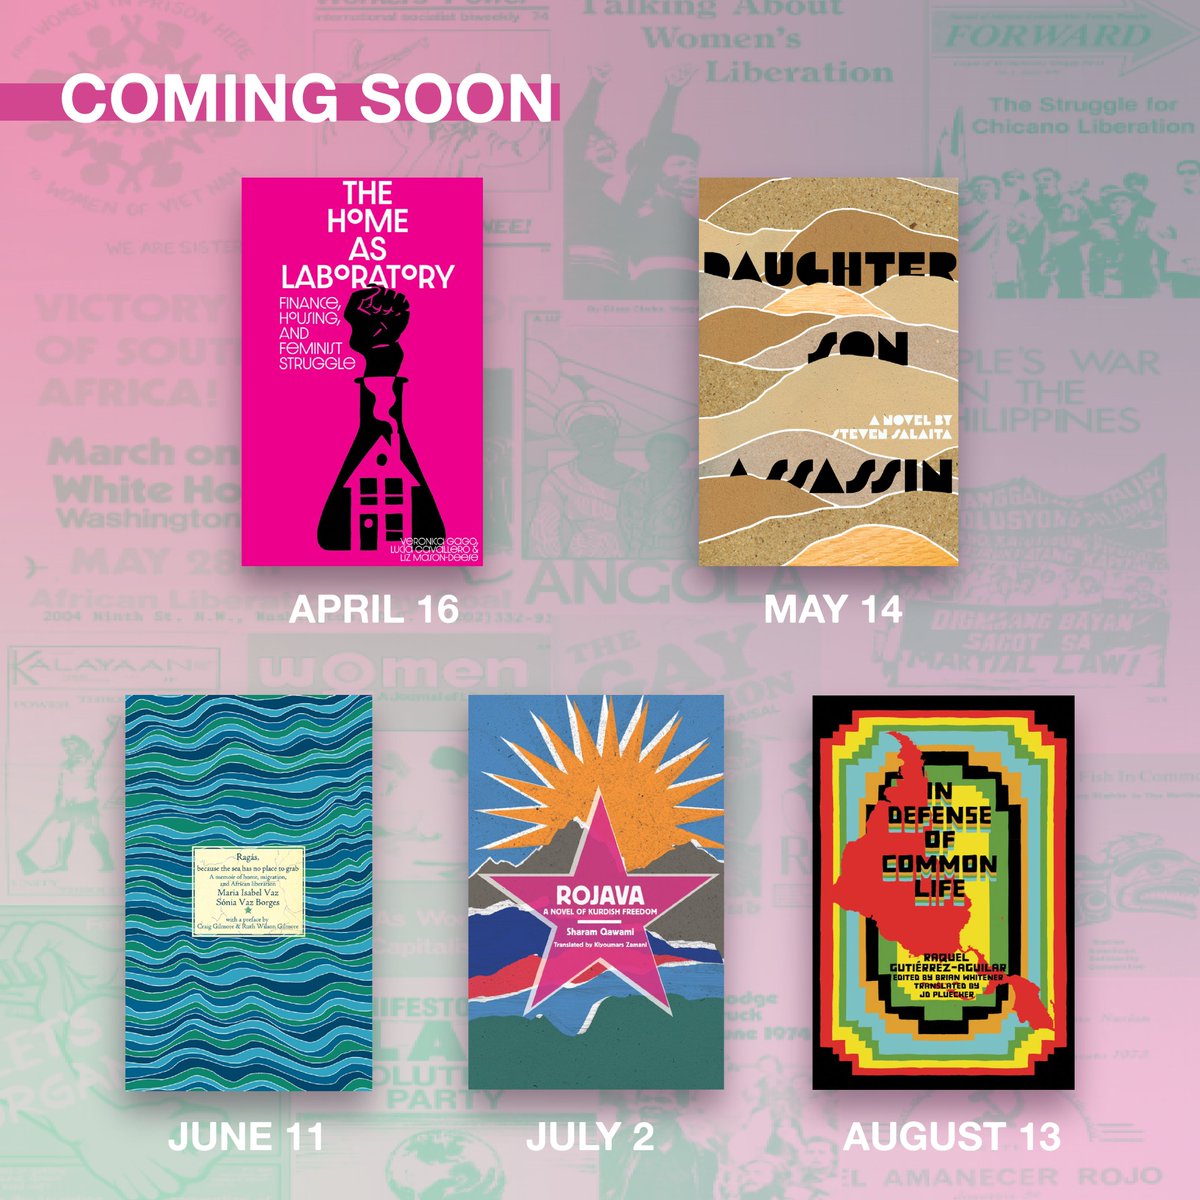 The trees are blooming and so is our spring catalog 🌸 Stay tuned for more information on these titles or check out our website if you can't wait to preorder! commonnotions.org/books